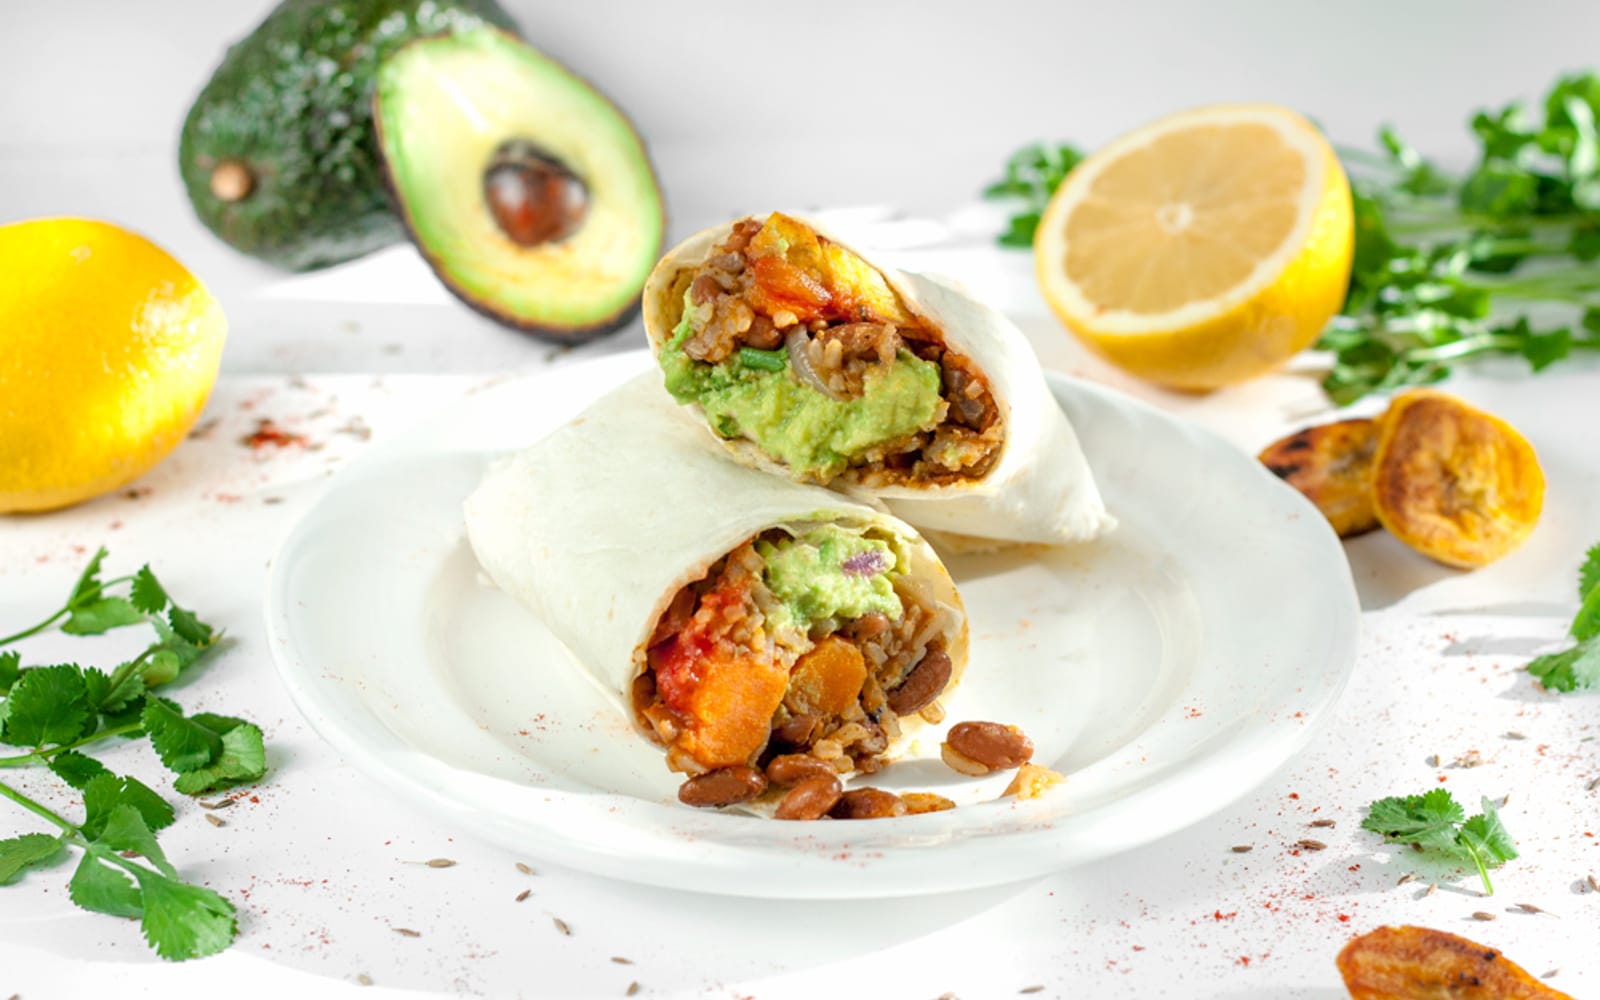 Sweet Potato and Bean Burrito With Plantains and Guacamole